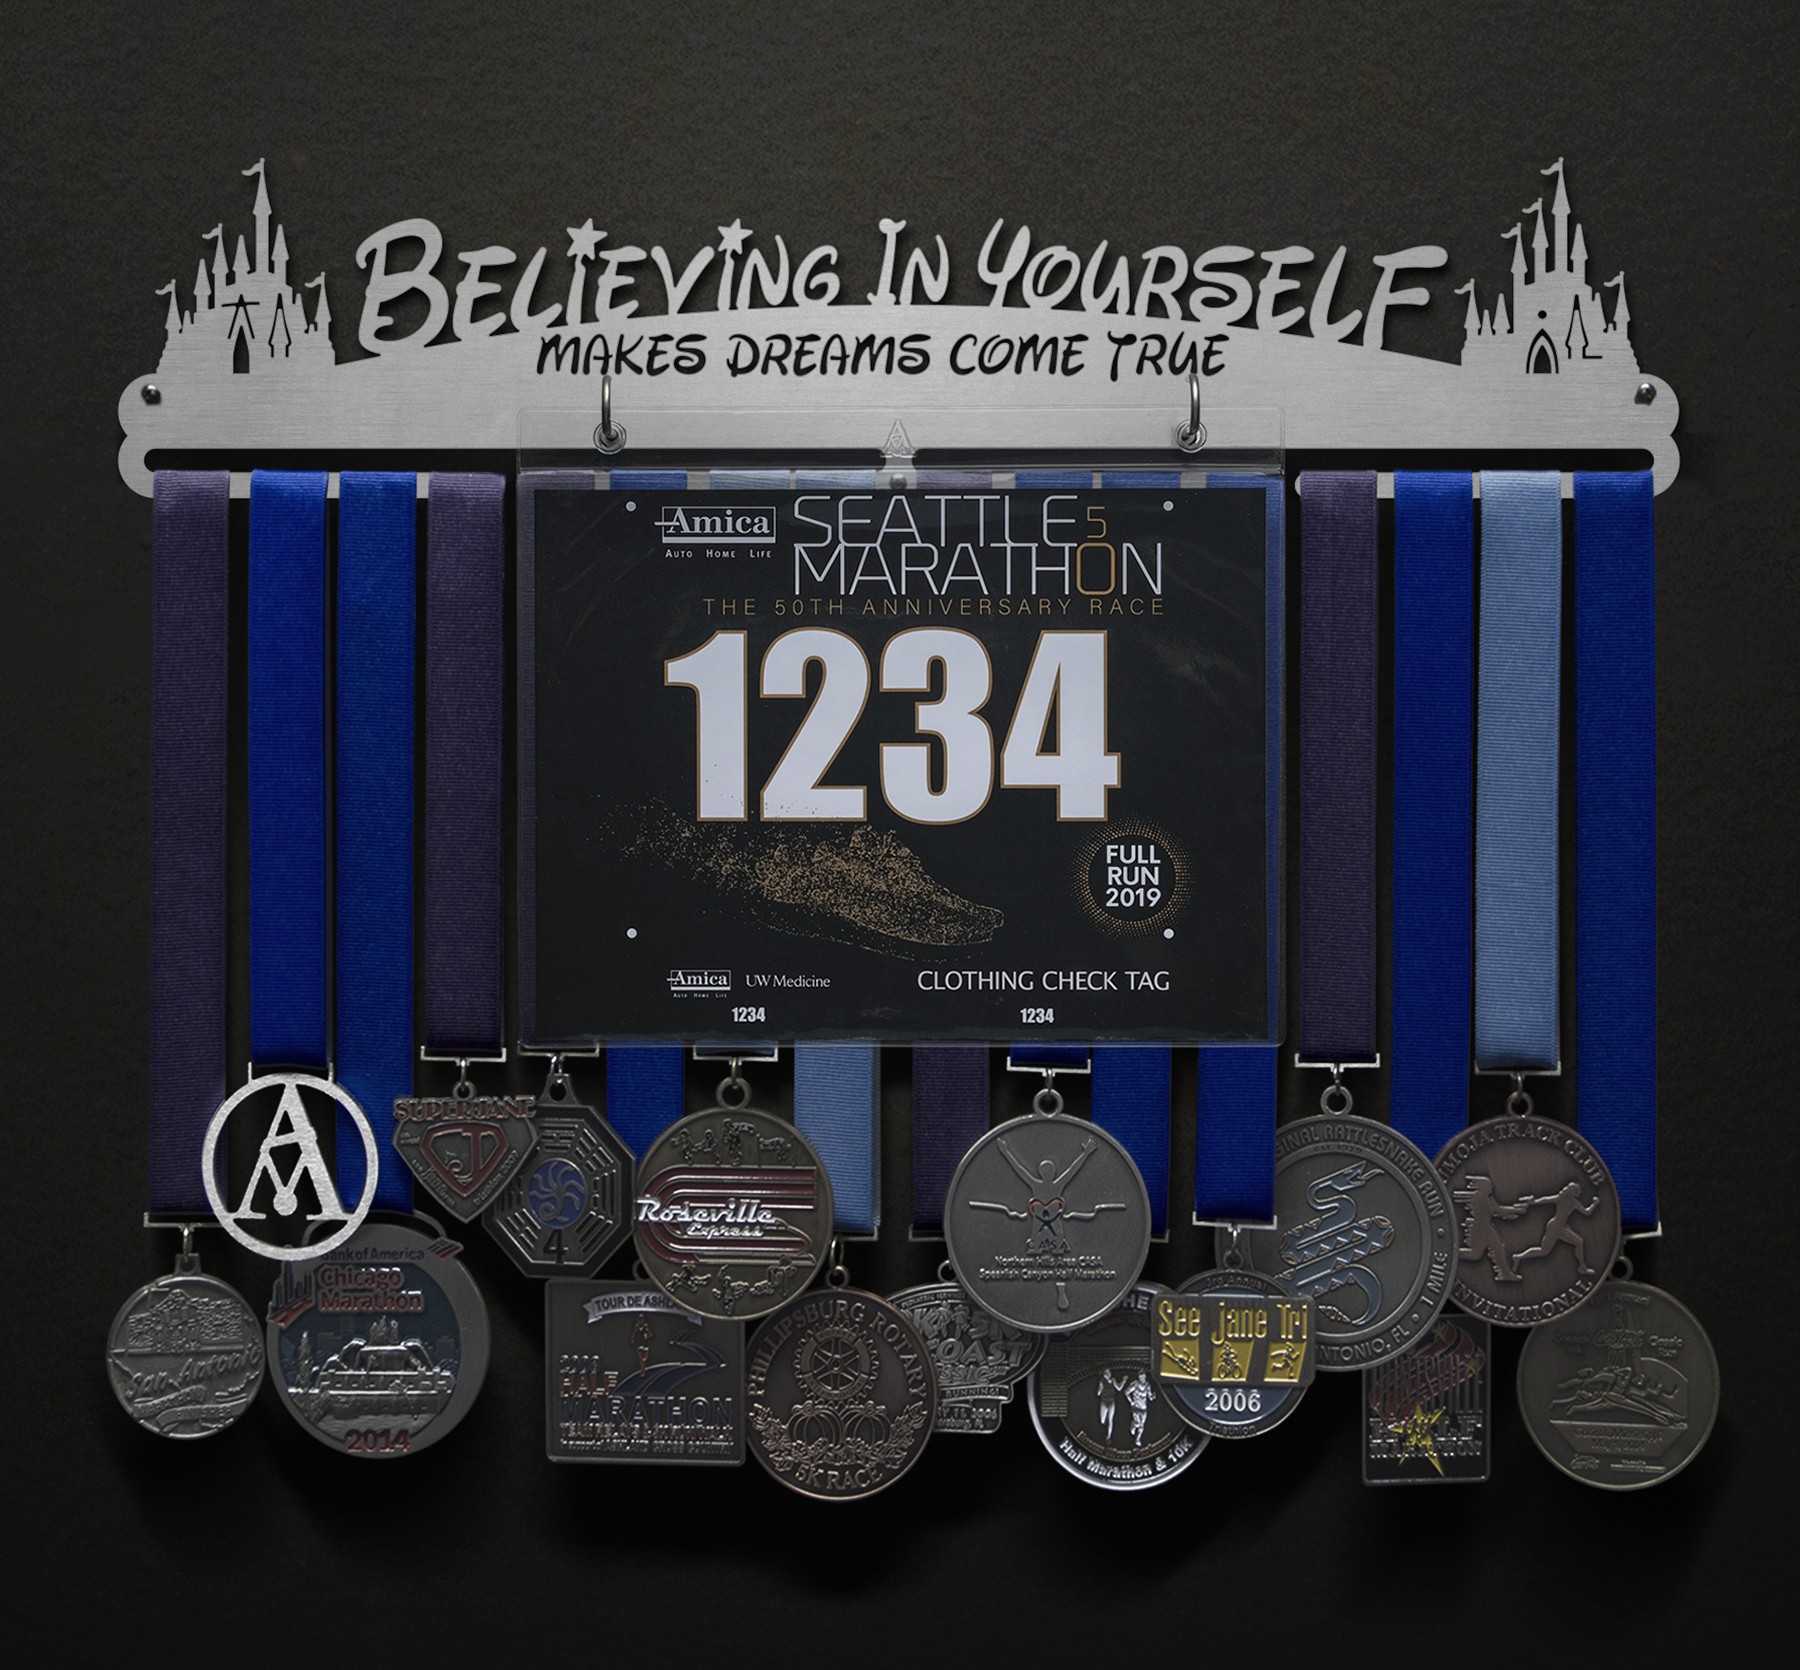 Believing In Yourself Makes Dreams Come True Bib and Medal Display